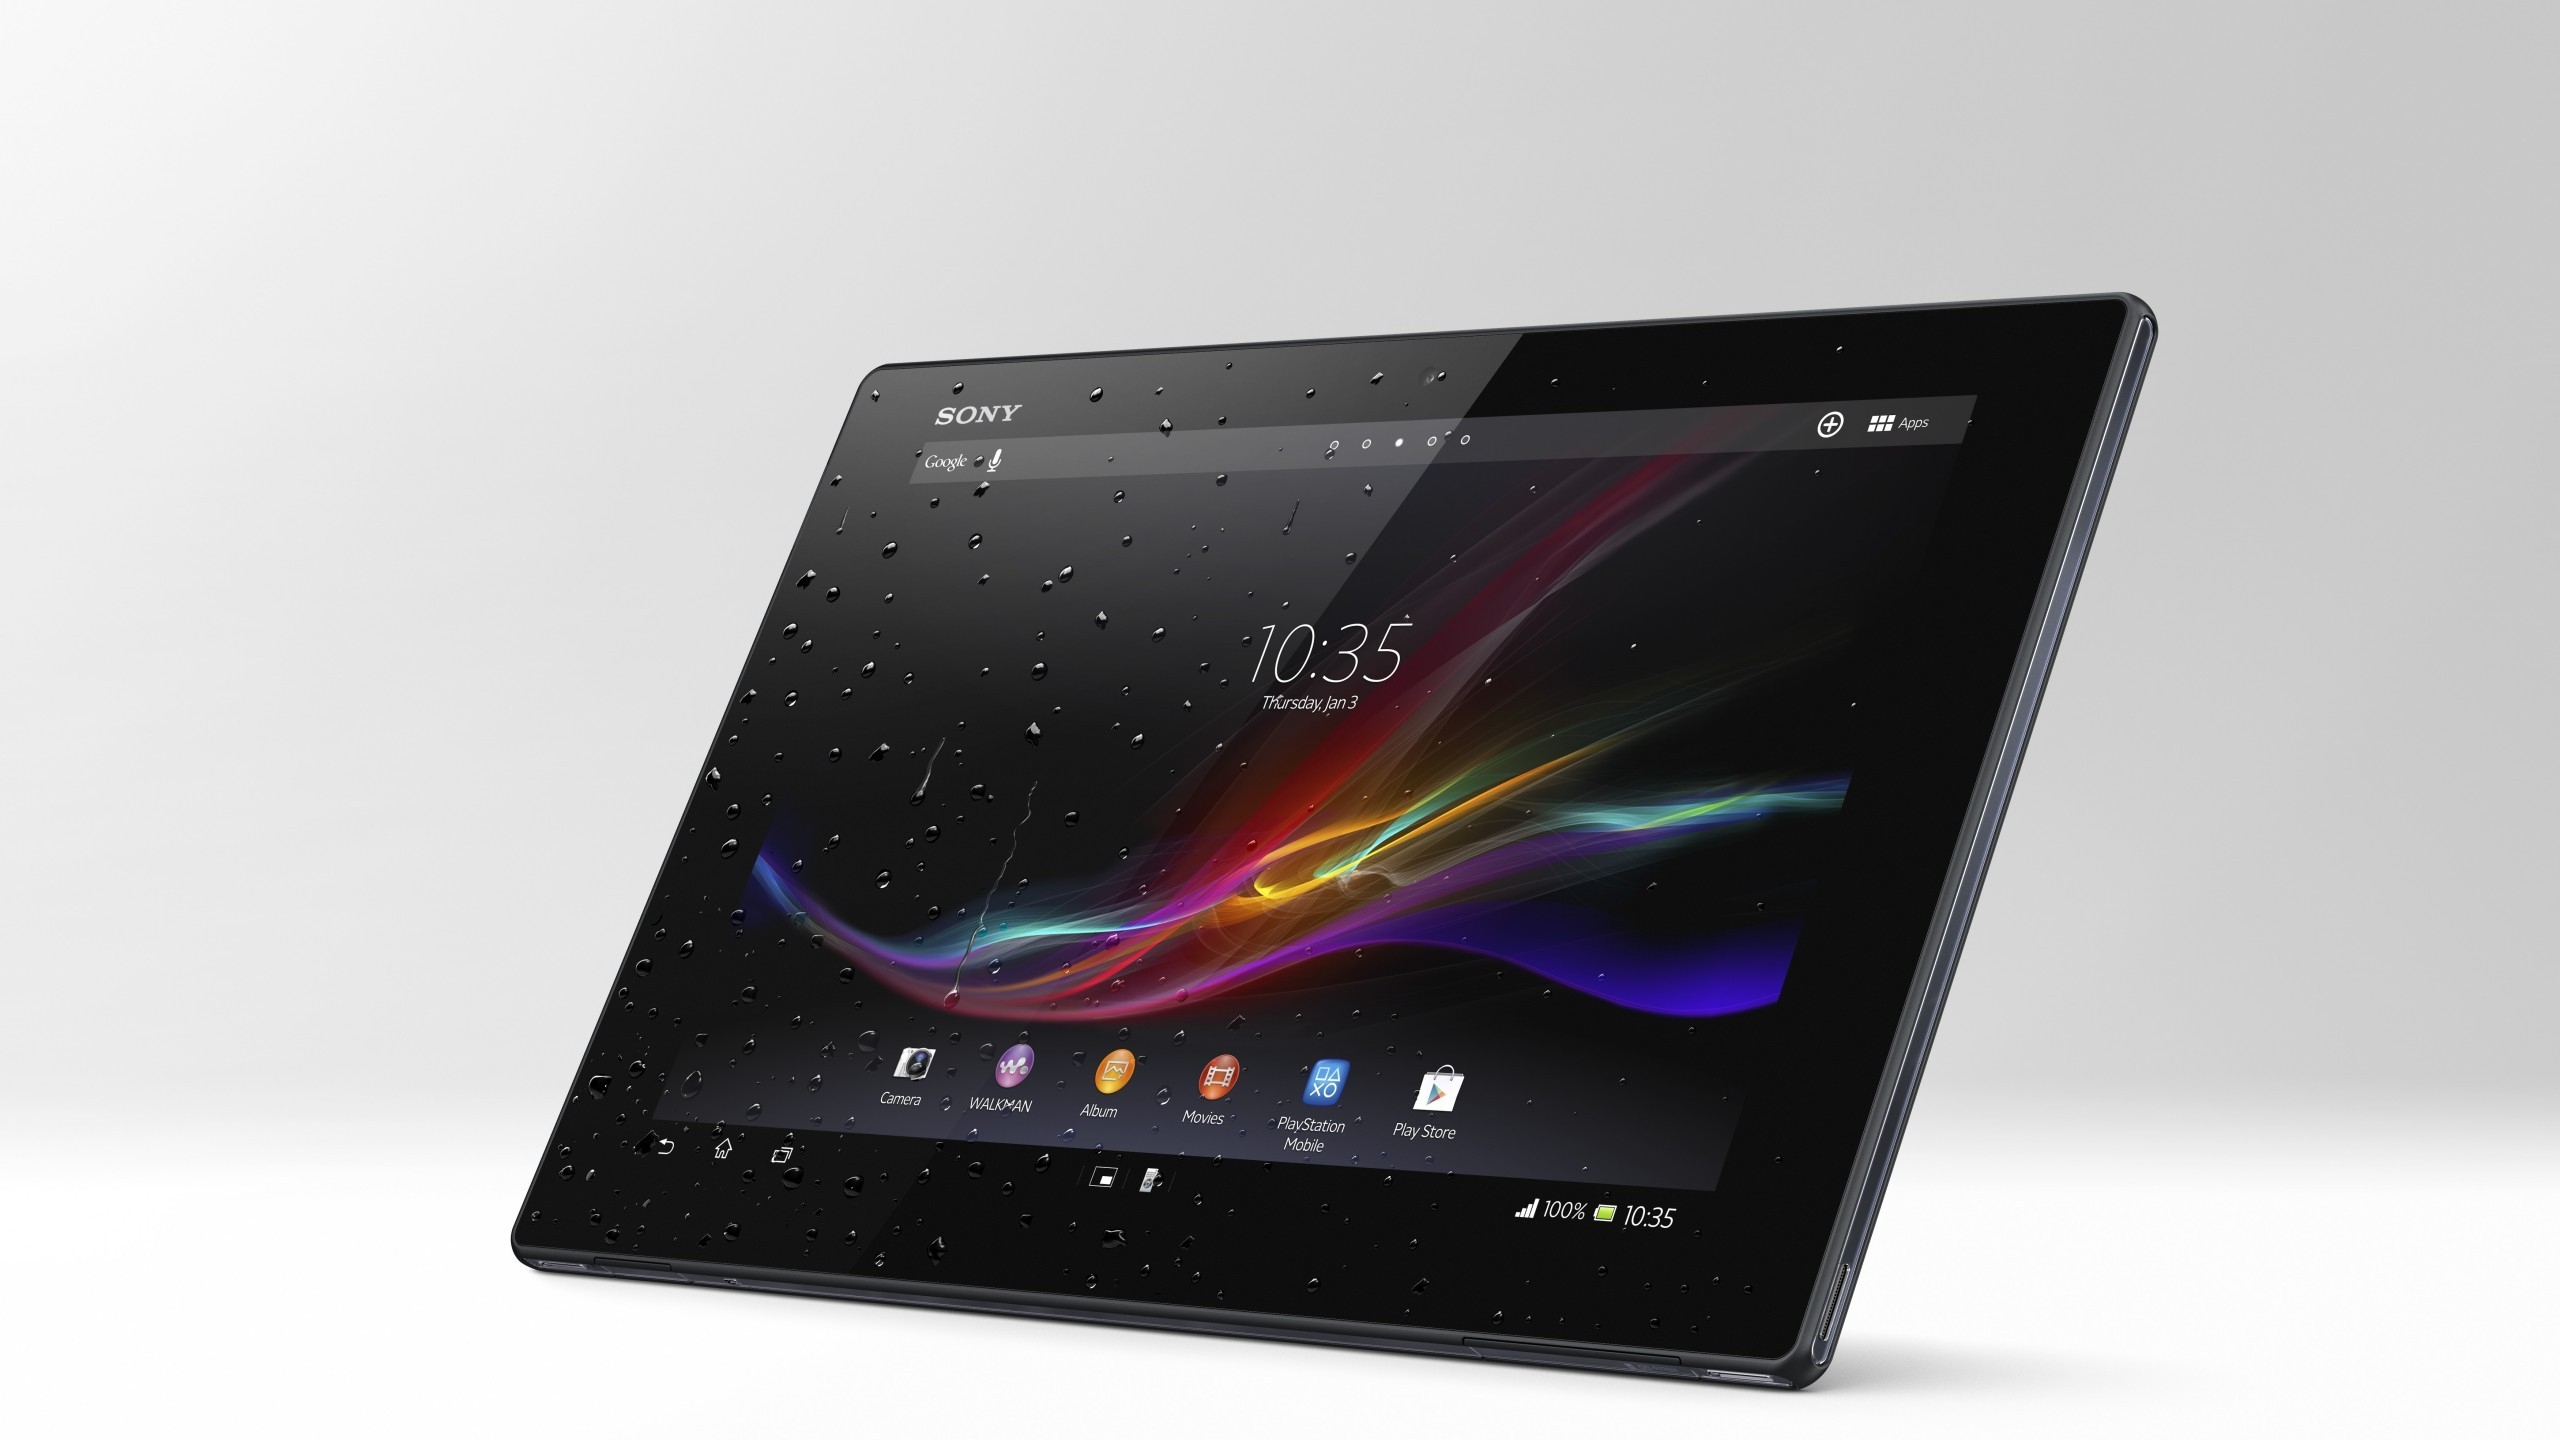 New Sony Xperia Z Tablet for 2560x1440 HDTV resolution